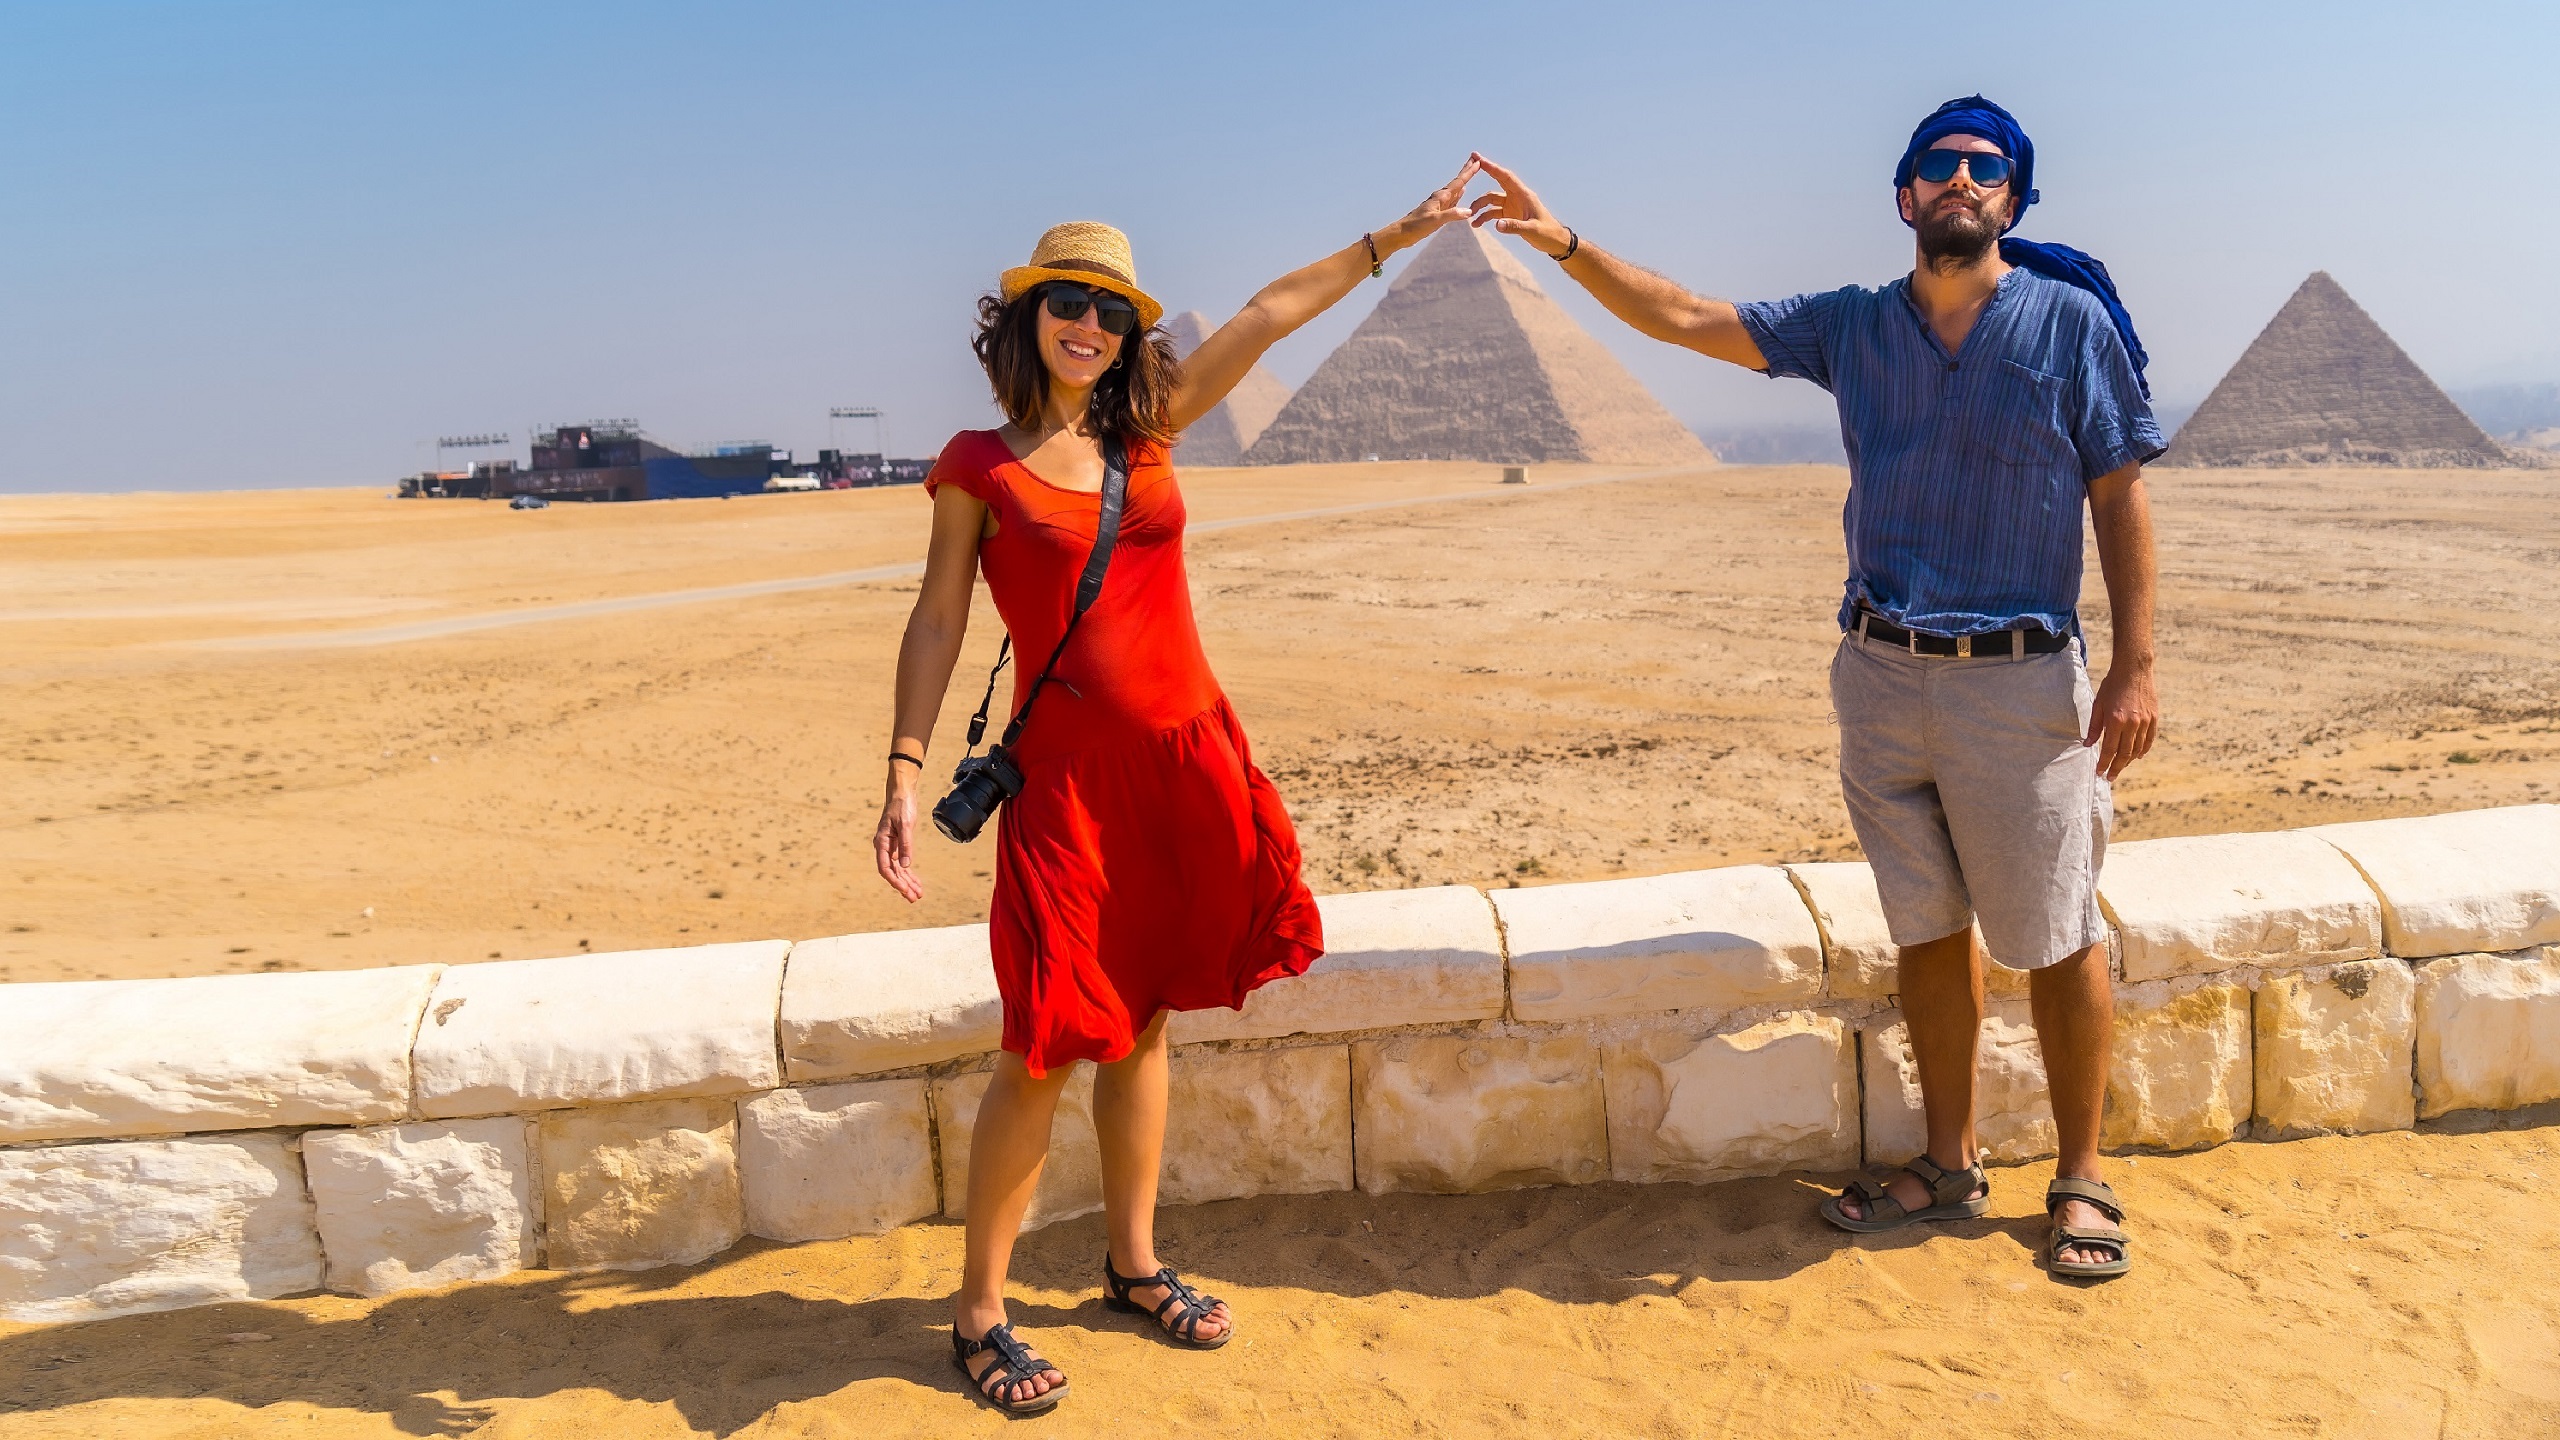 Egypt: Number of Visitors Grows by 85% in First Half of 2022 Compared to Same Period Last Year